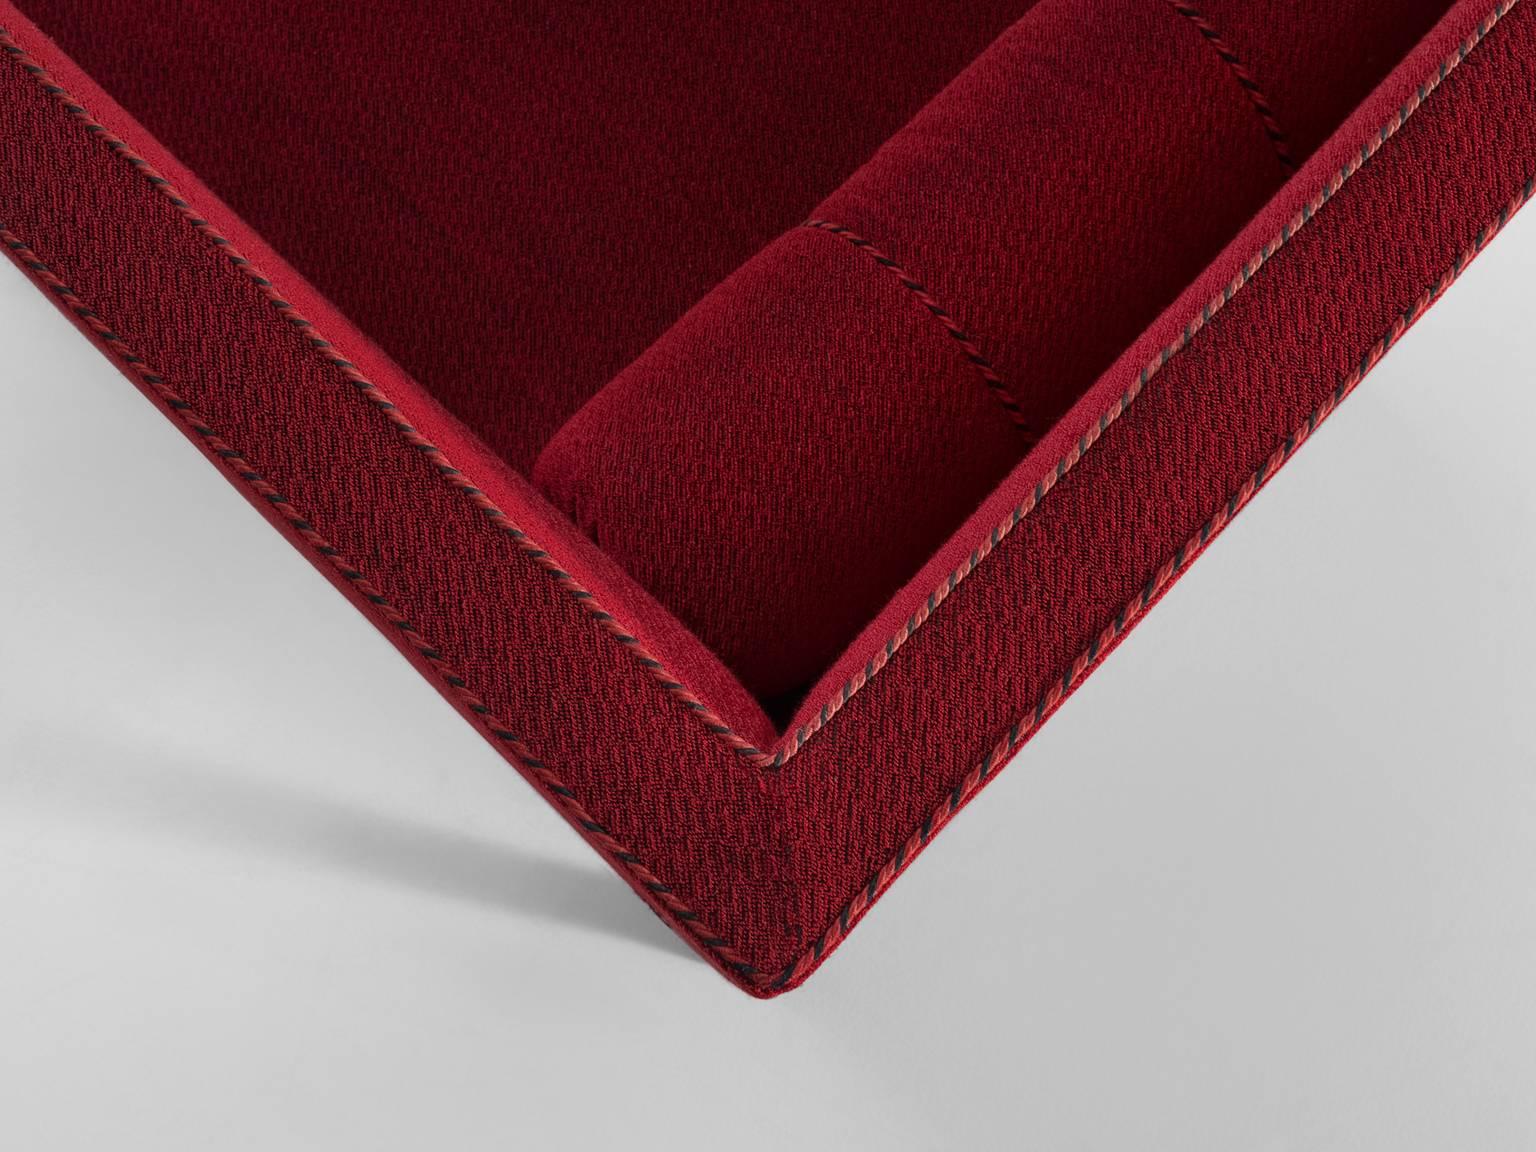 Early Swedish 'Grace' Chaise Longue in Deep Red 1